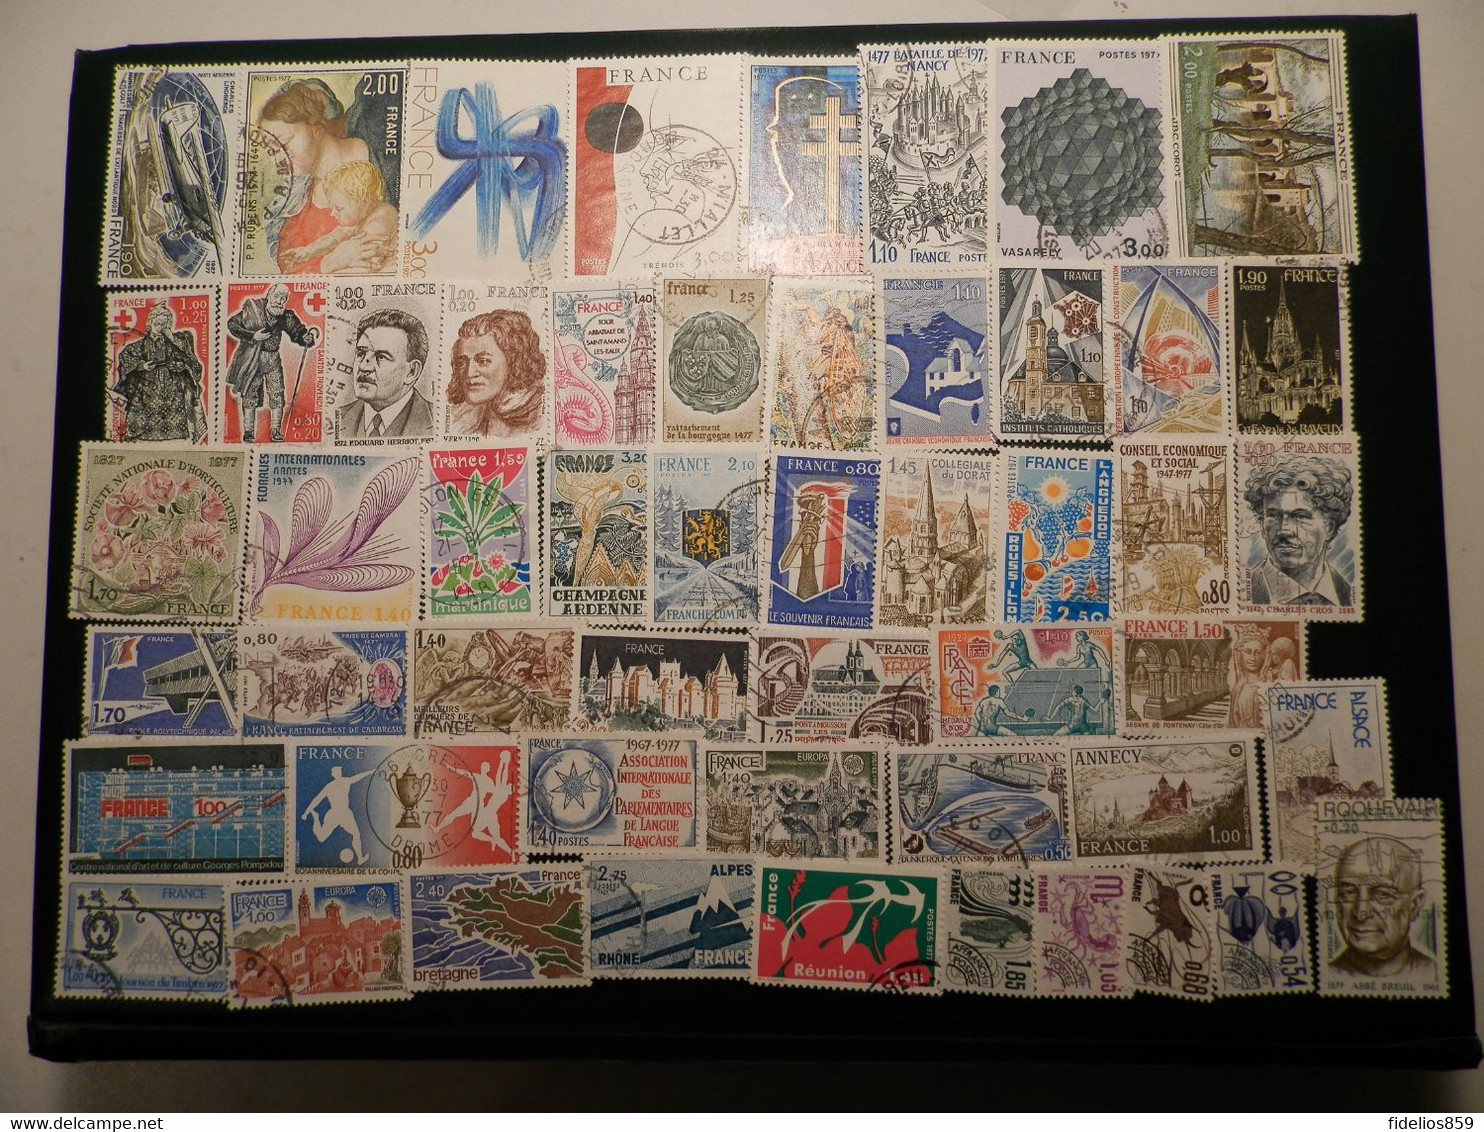 FRANCE ANNEE COMPLETE 1977 OBLITEREE SOIT 48 TIMBRES POSTE + PA 50 + PREOS 146/49 1ER CHOIX - 1970-1979